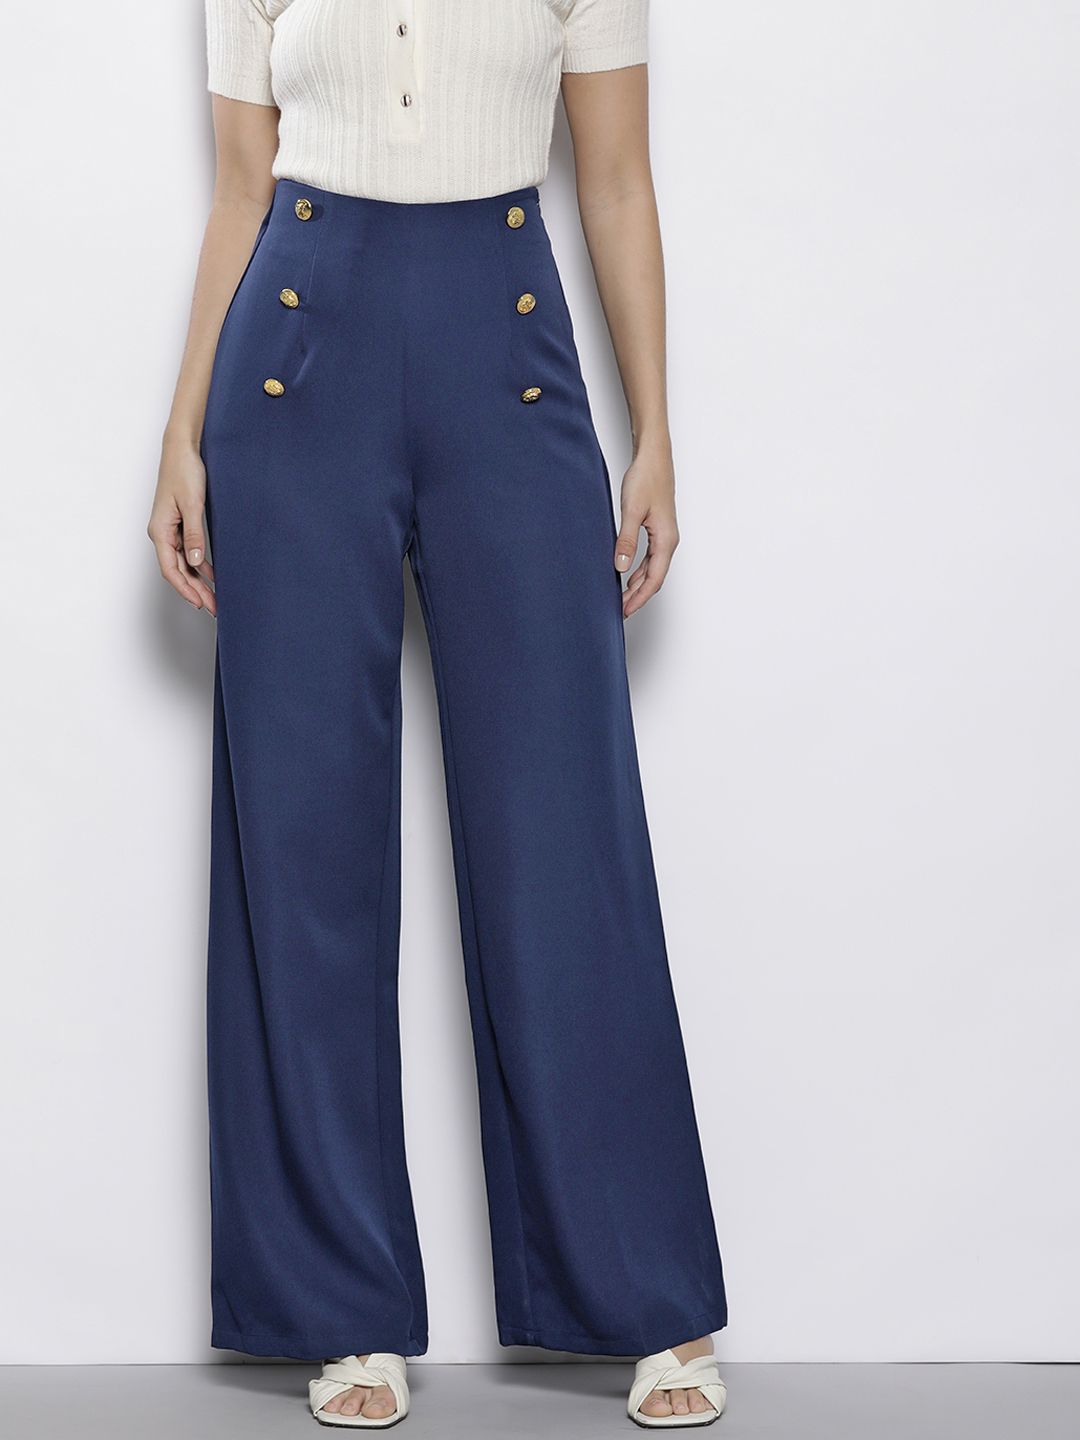 DOROTHY PERKINS Women High-Rise Trousers Price in India